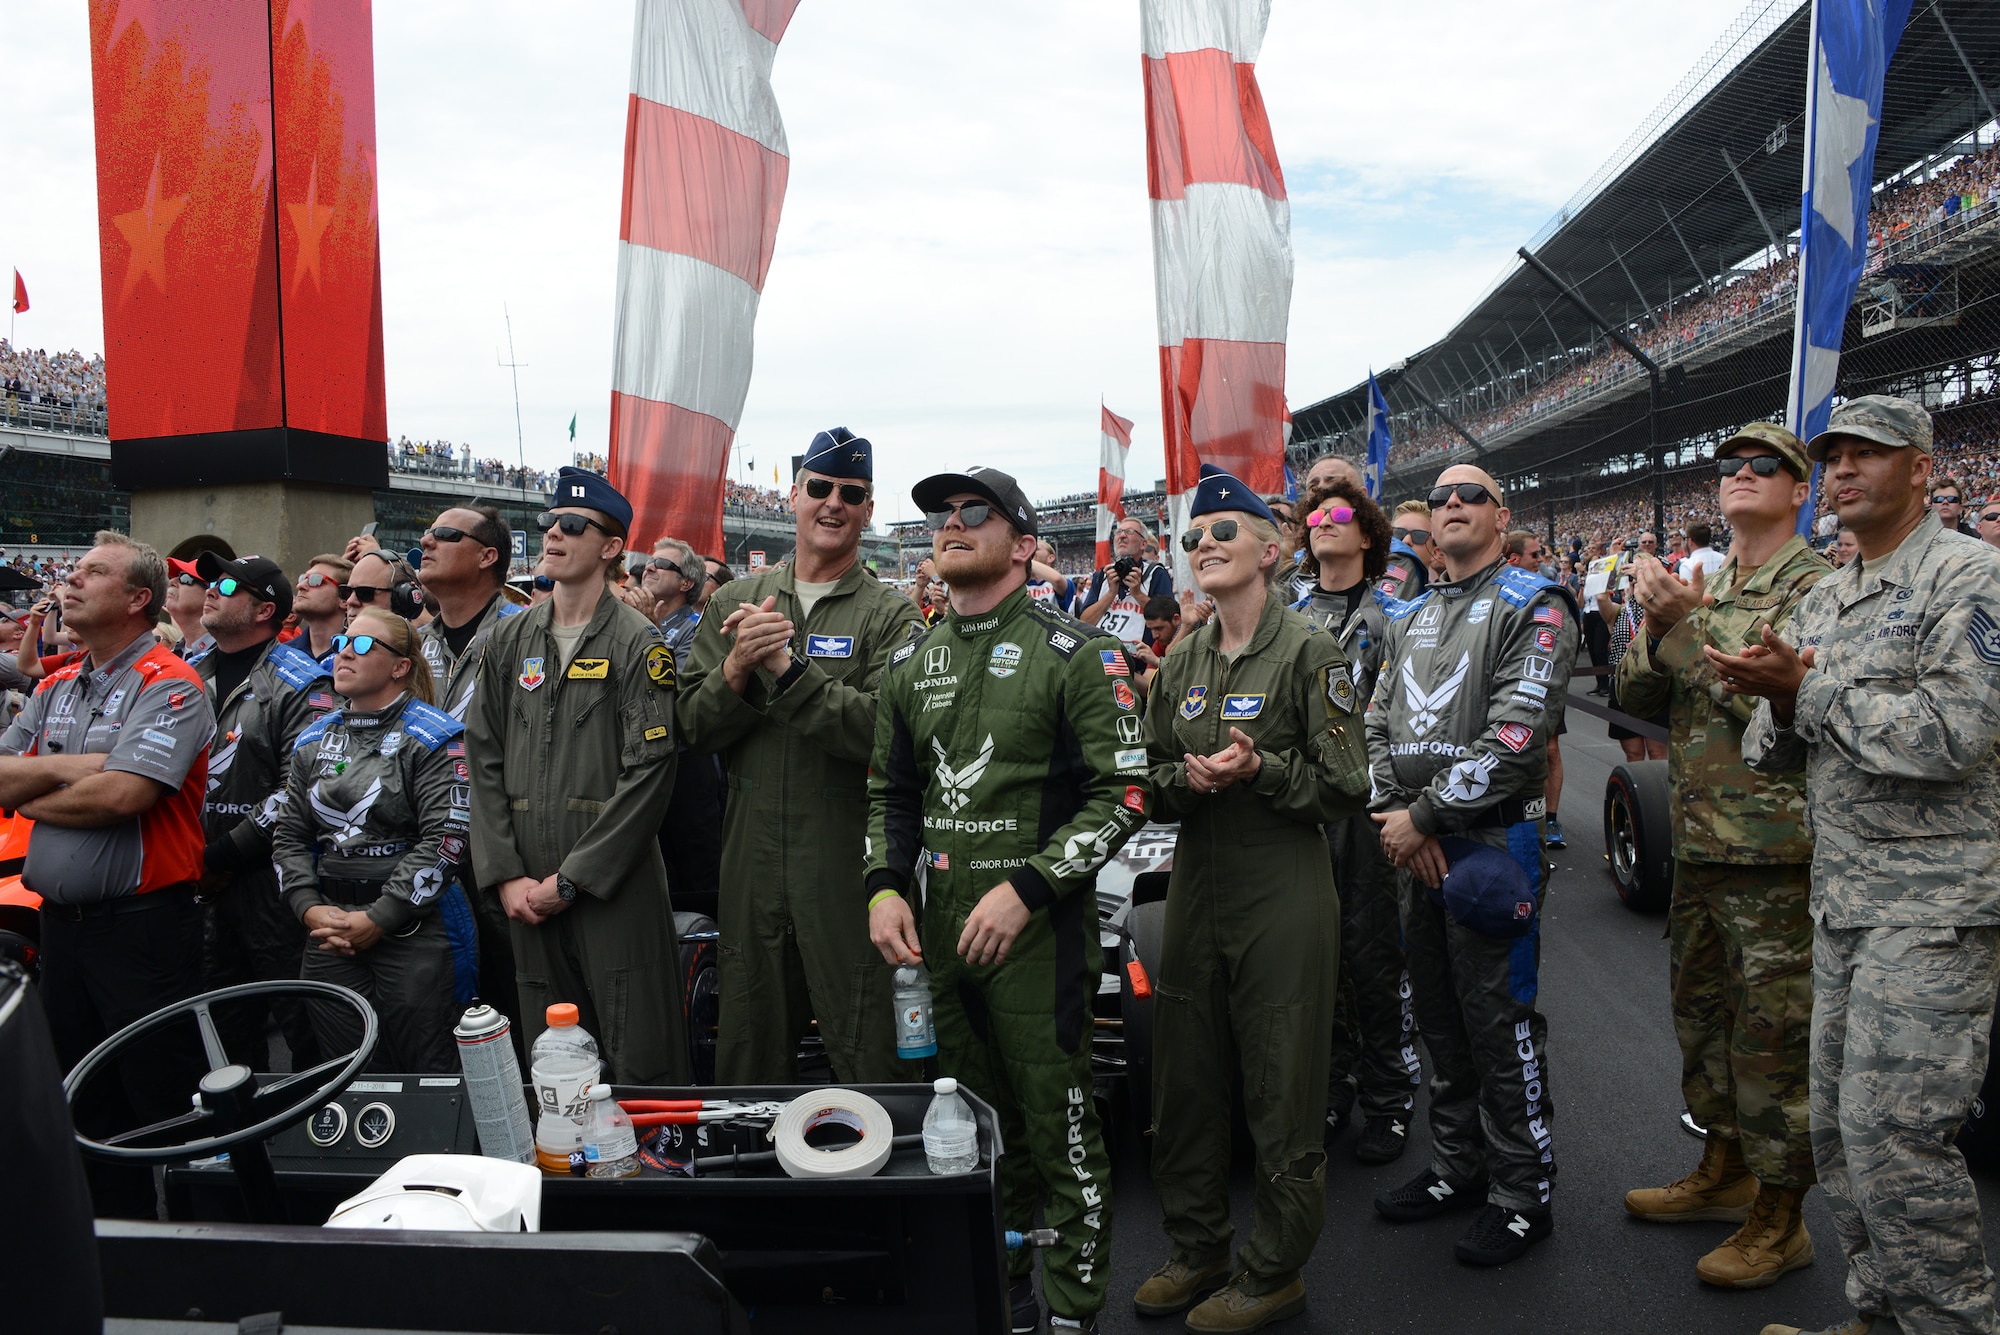 Air Force partnership with Indy 500